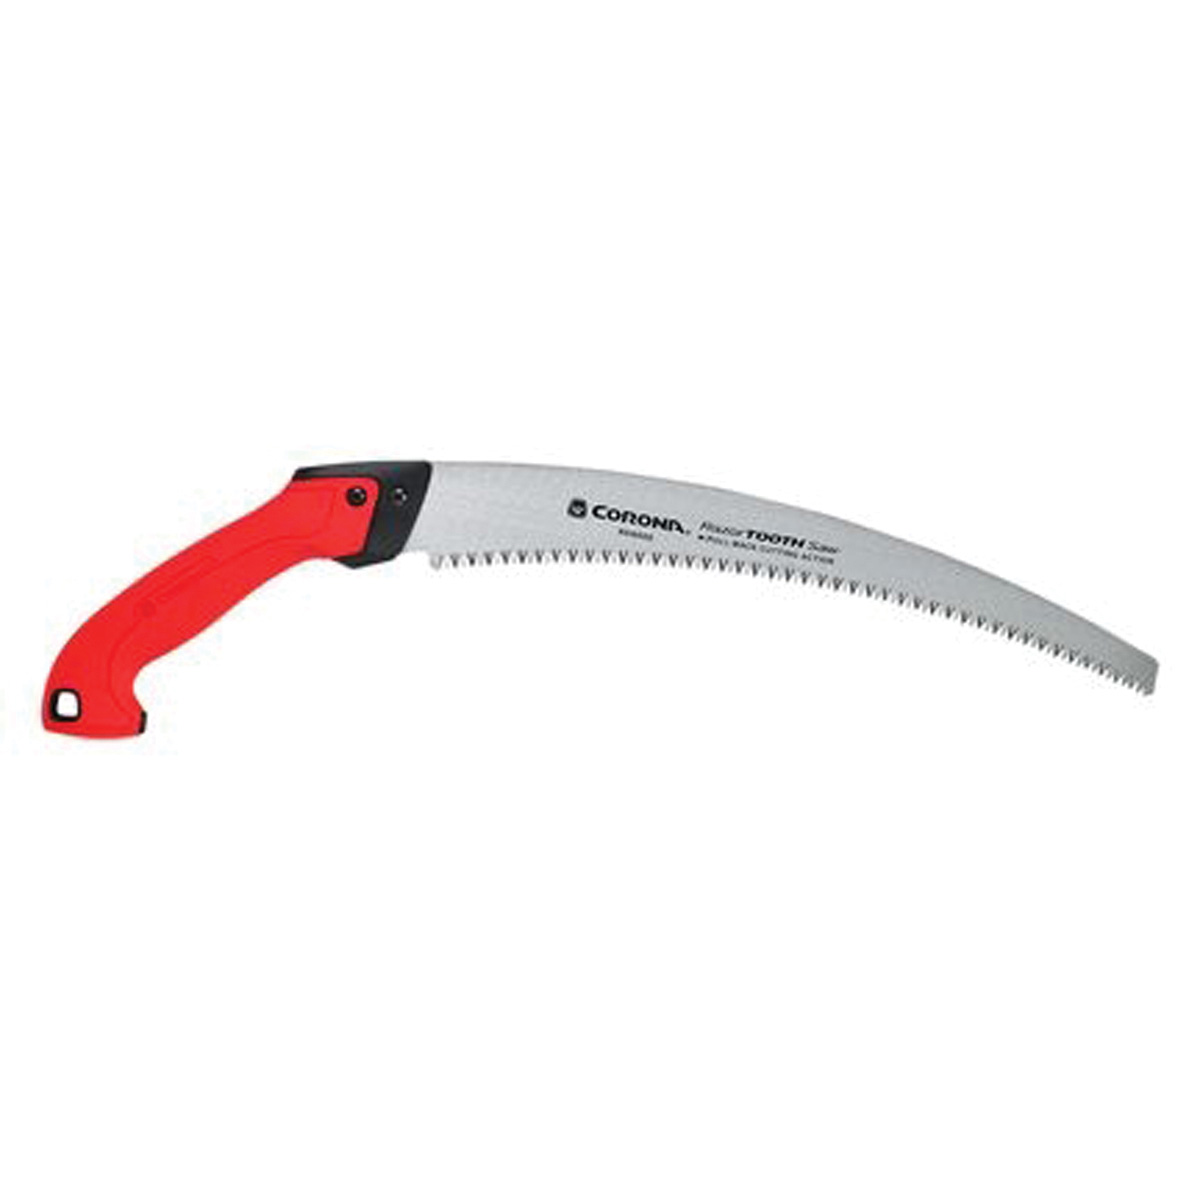 CORONA RS16020 Curved Pruning Saw, 14 in Blade, SK5 Steel Blade, 6 TPI, Rubber Handle, Non-Slip Handle